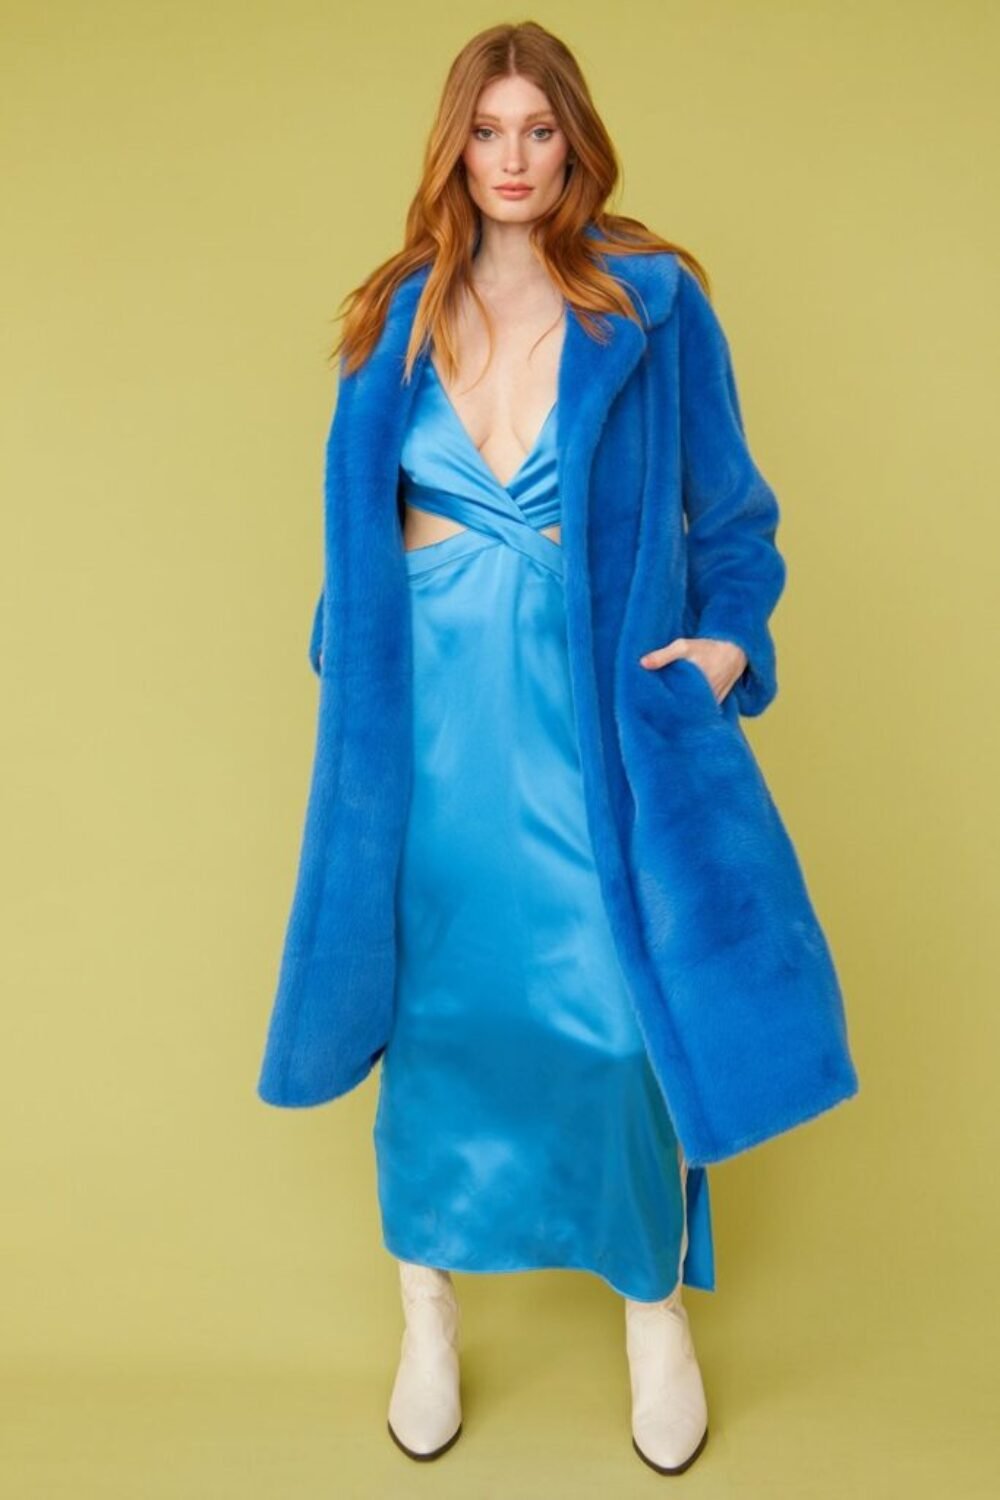 Shop Lux Blue Faux Fur Midi Coat and women's luxury and designer clothes at www.lux-apparel.co.uk